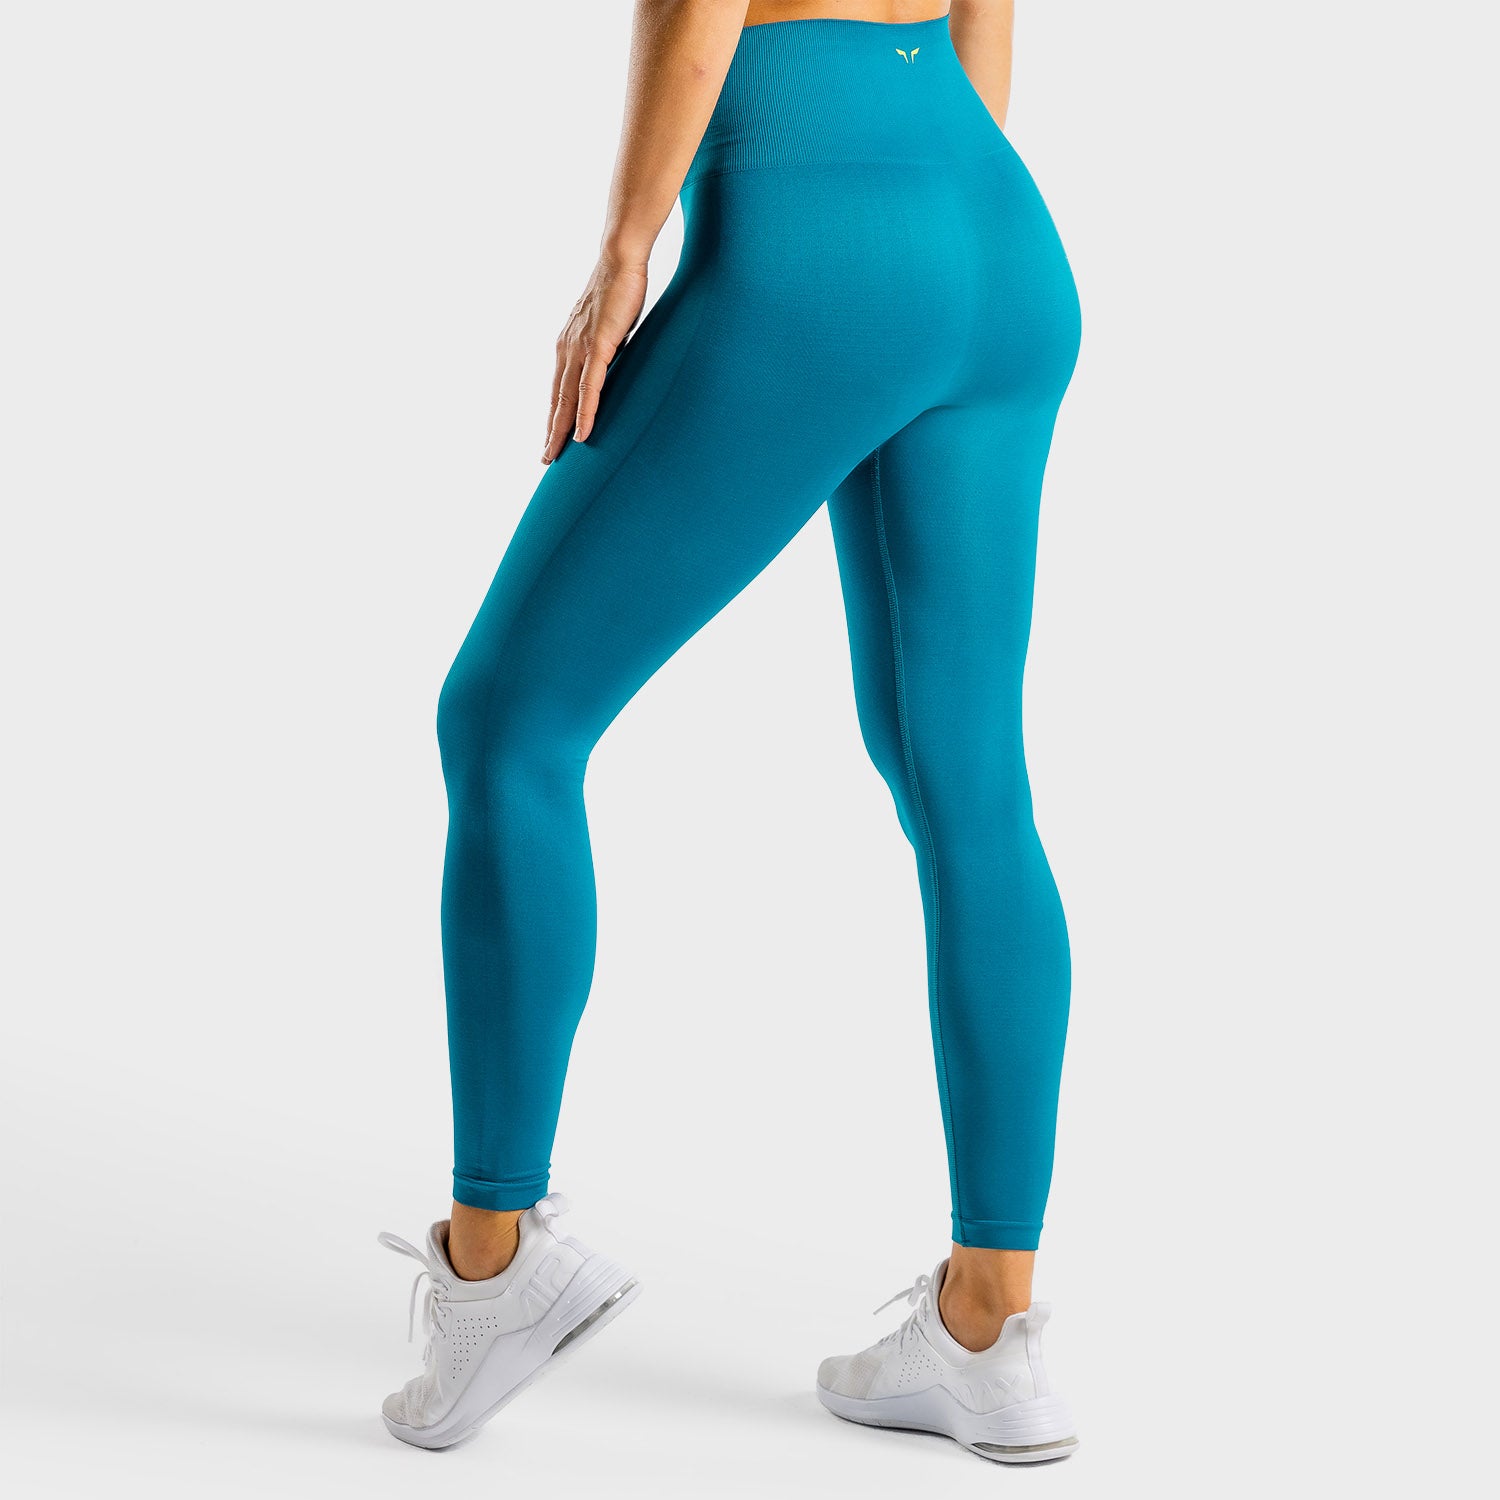 squatwolf-gym-leggings-for-women-core-seamless-leggings-blue-beat-workout-clothes